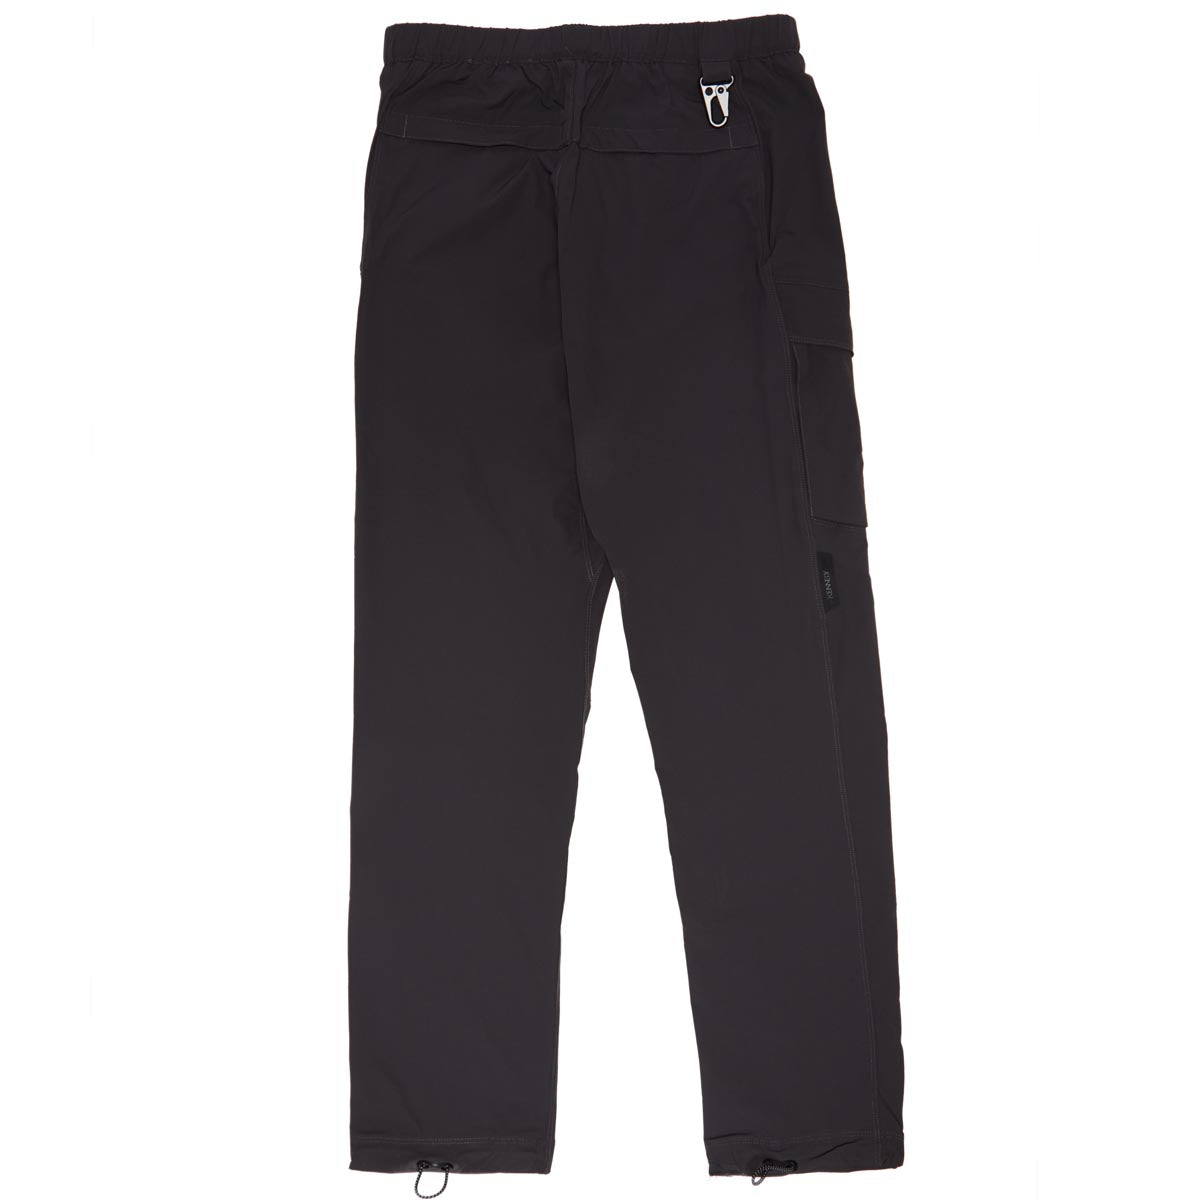 Kennedy The Ascension Cargo Pants - Charcoal image 2